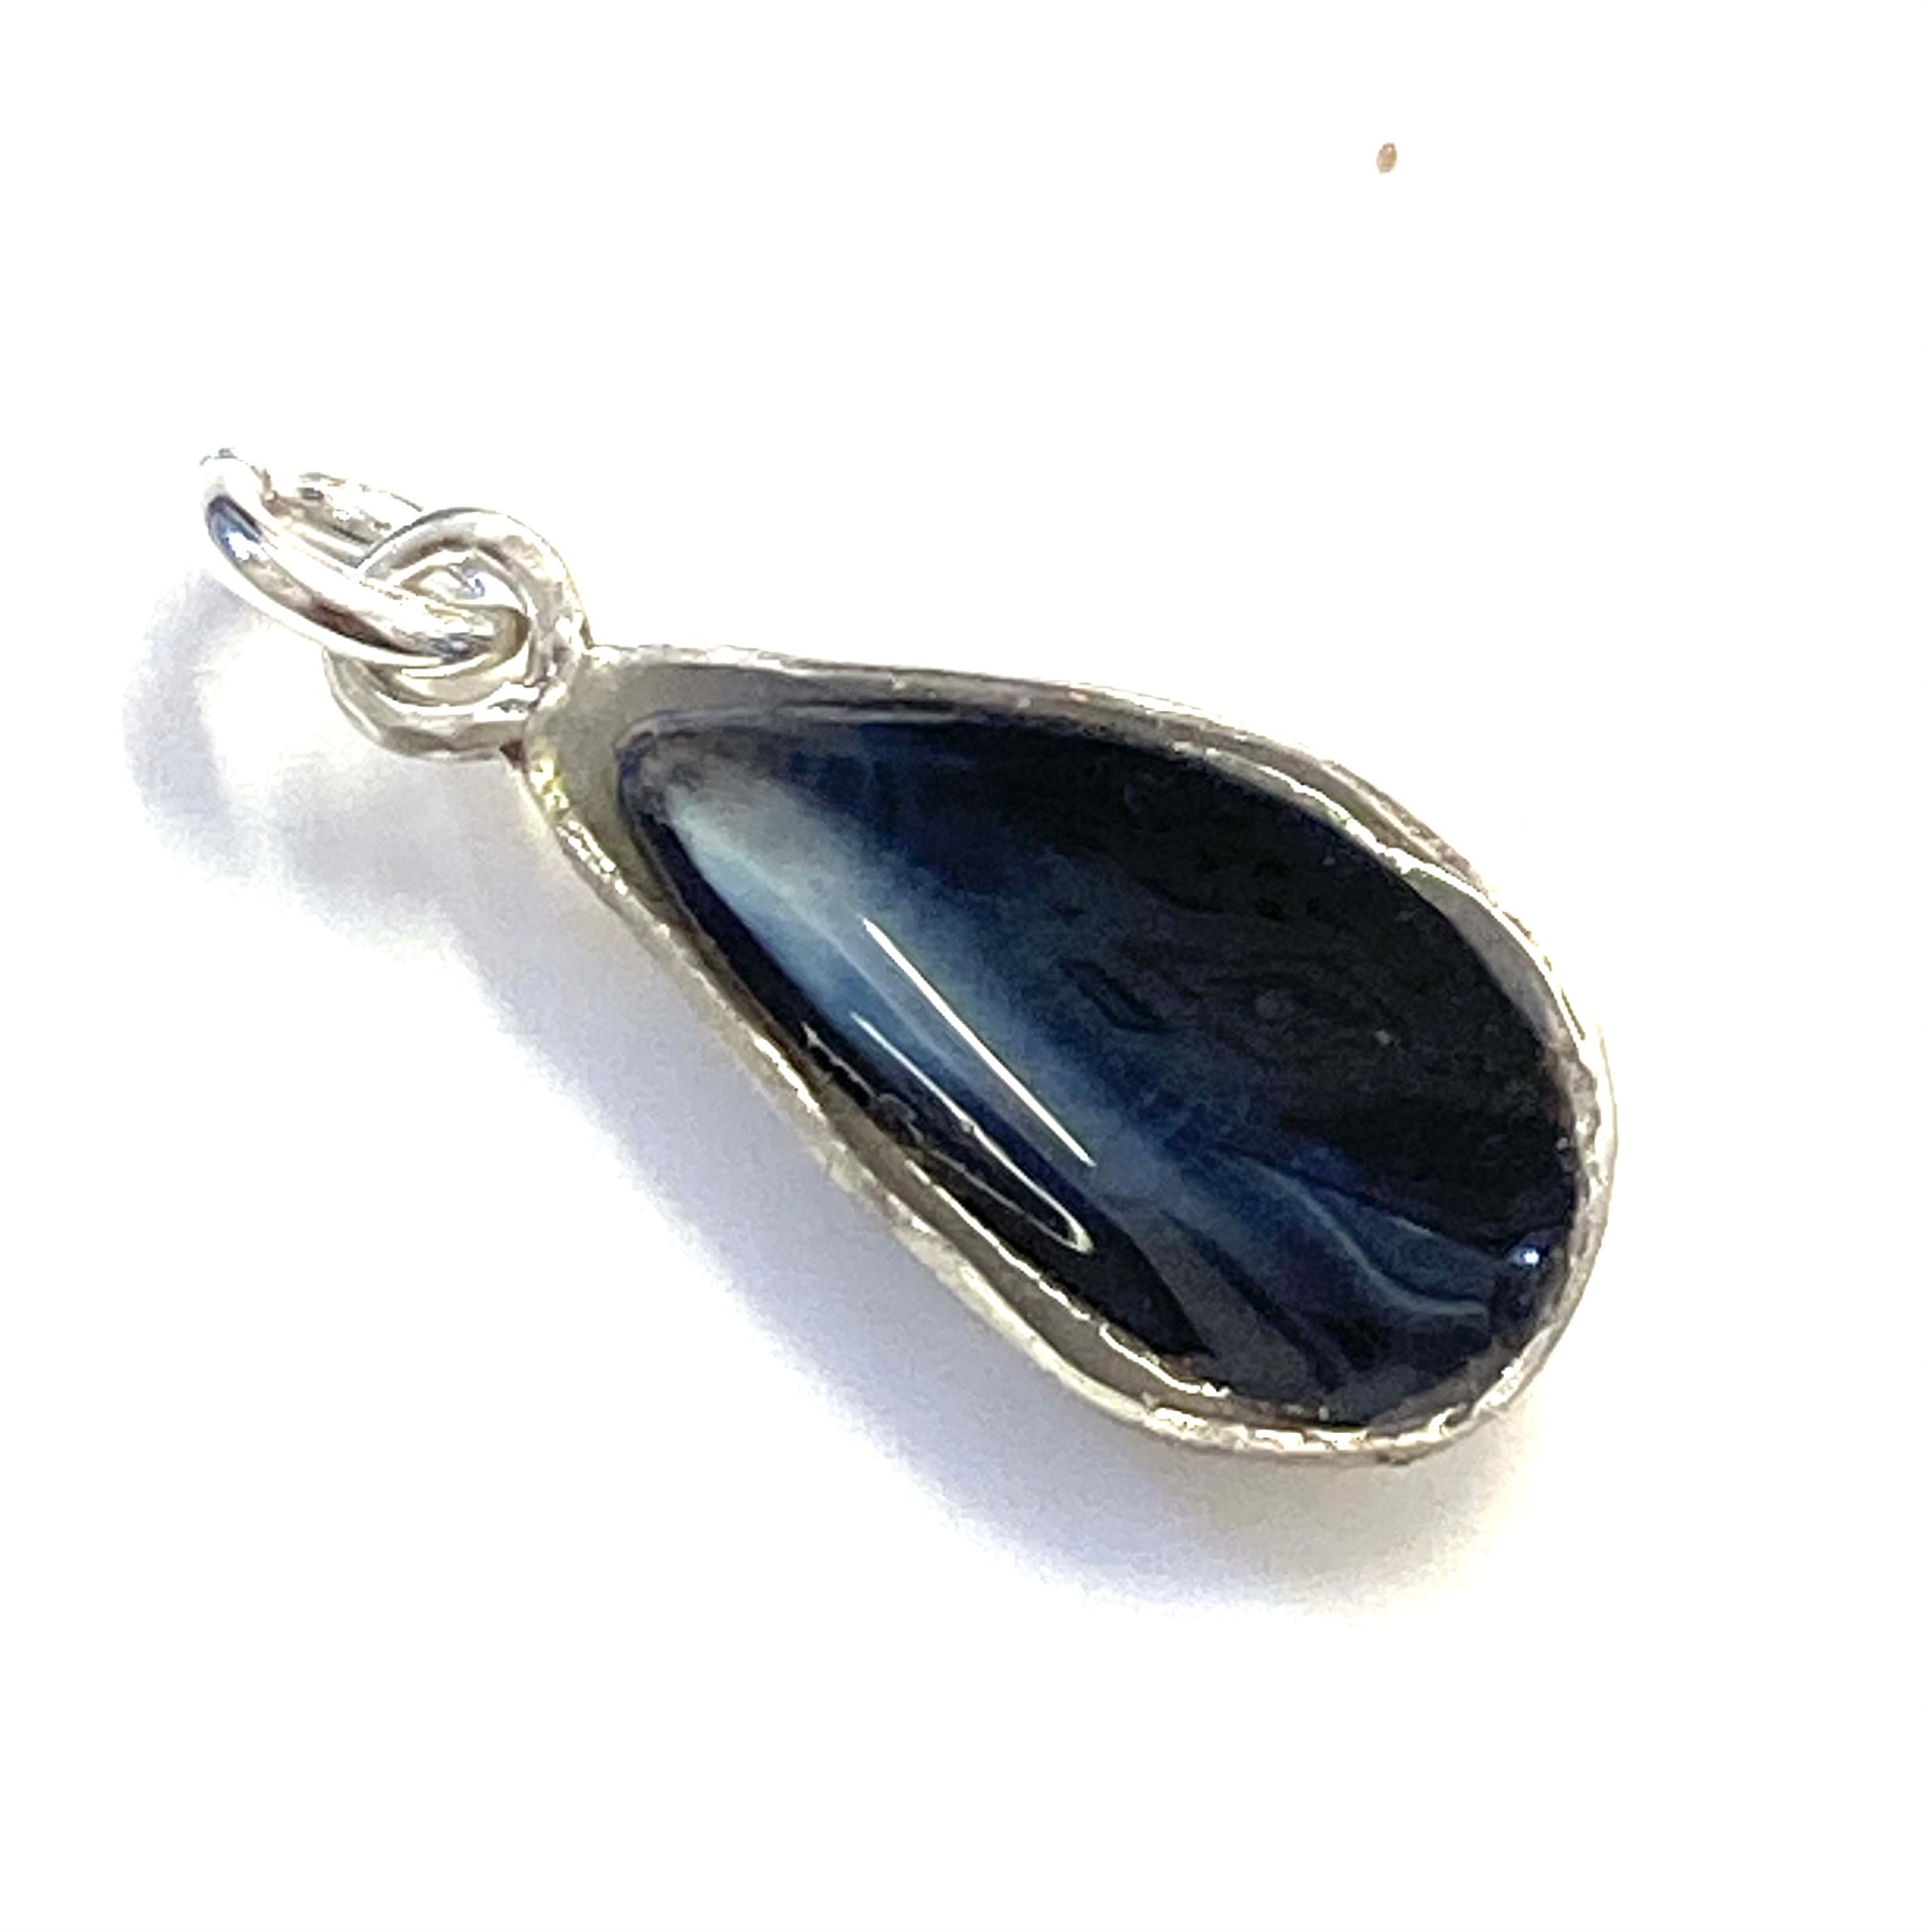 Real Mussel shell set in silver charm front view 